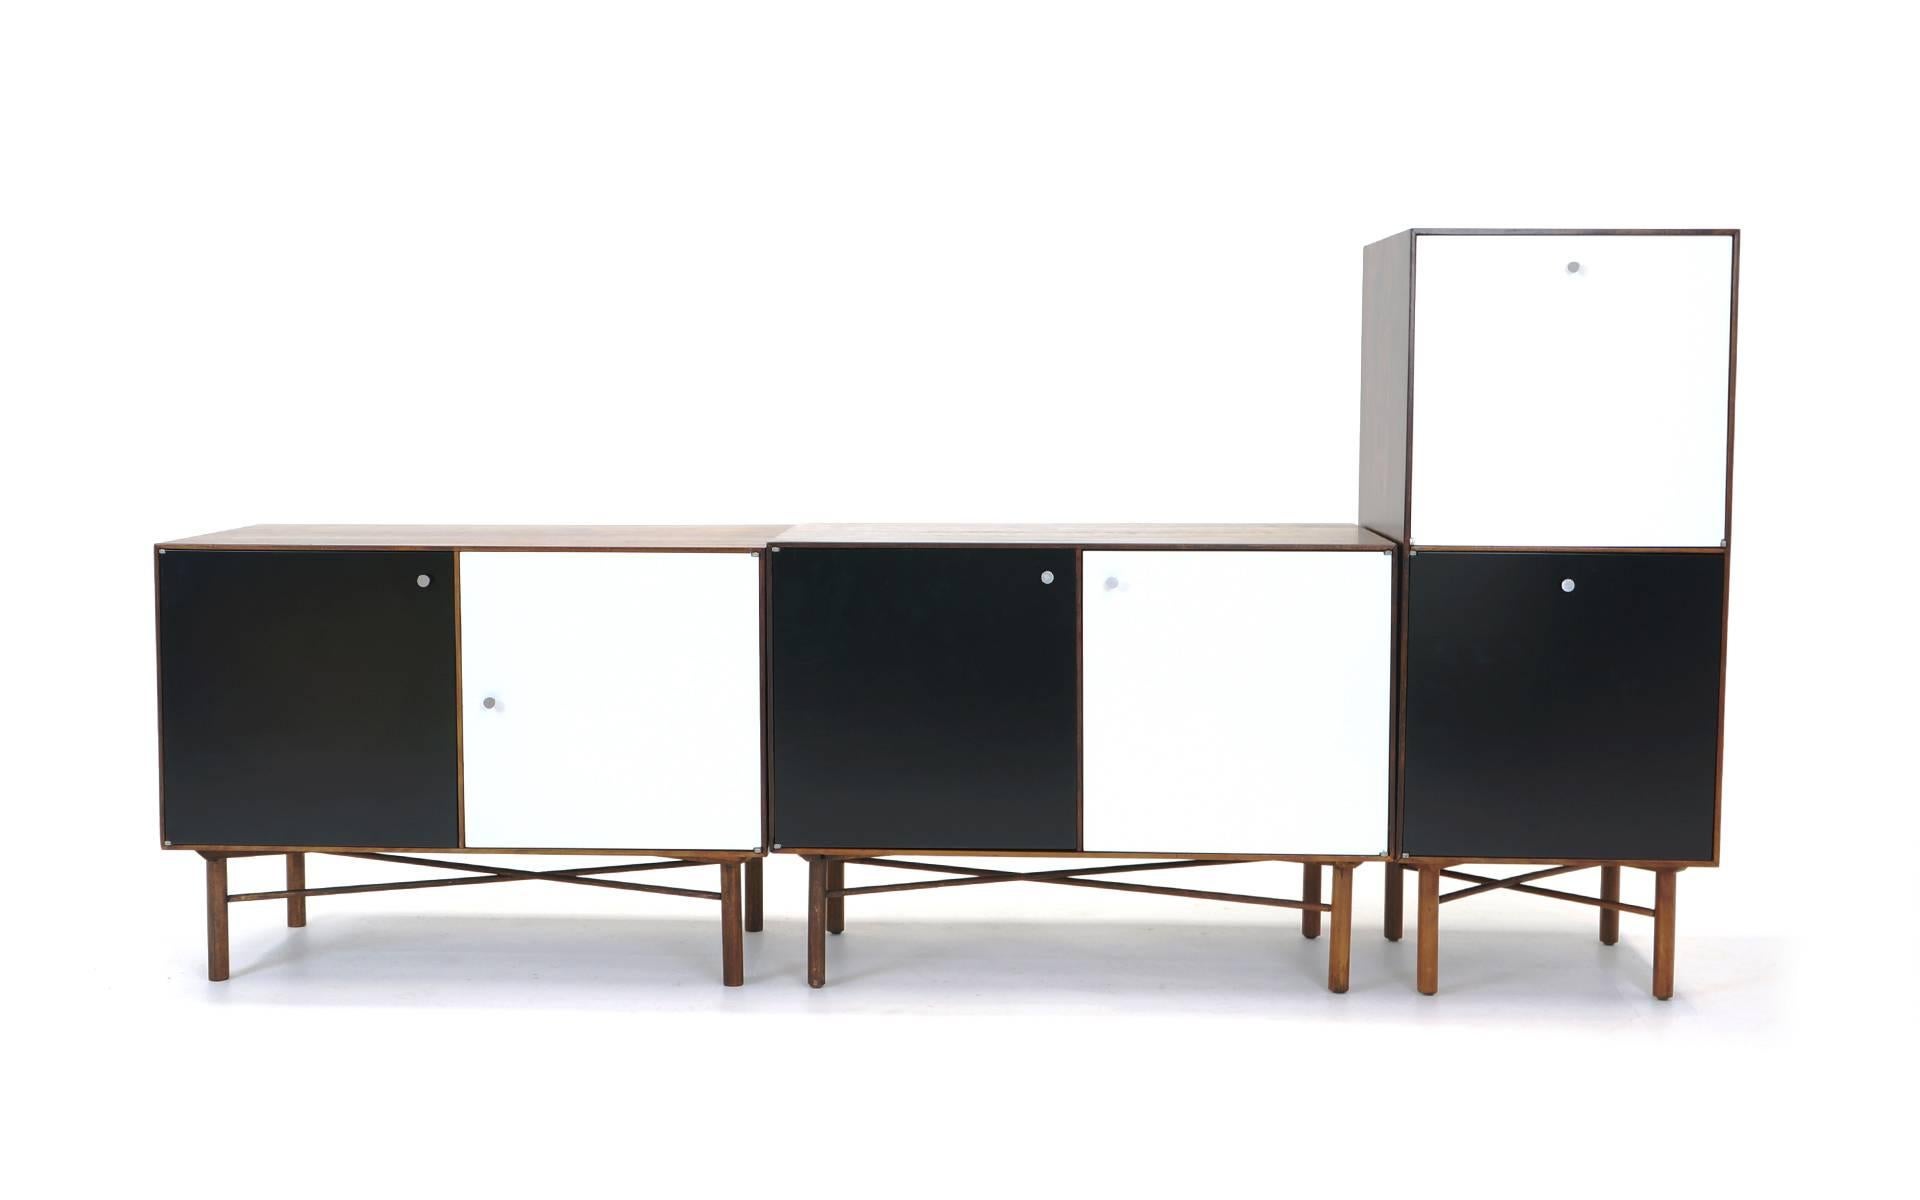 Five modular walnut cabinets with black and white lacquered doors and original pulls, with dowel legs and X-cross stretchers. Two vertical cabinets and three horizontal cabinets. Each cabinet consists of two storage compartments. Each compartment